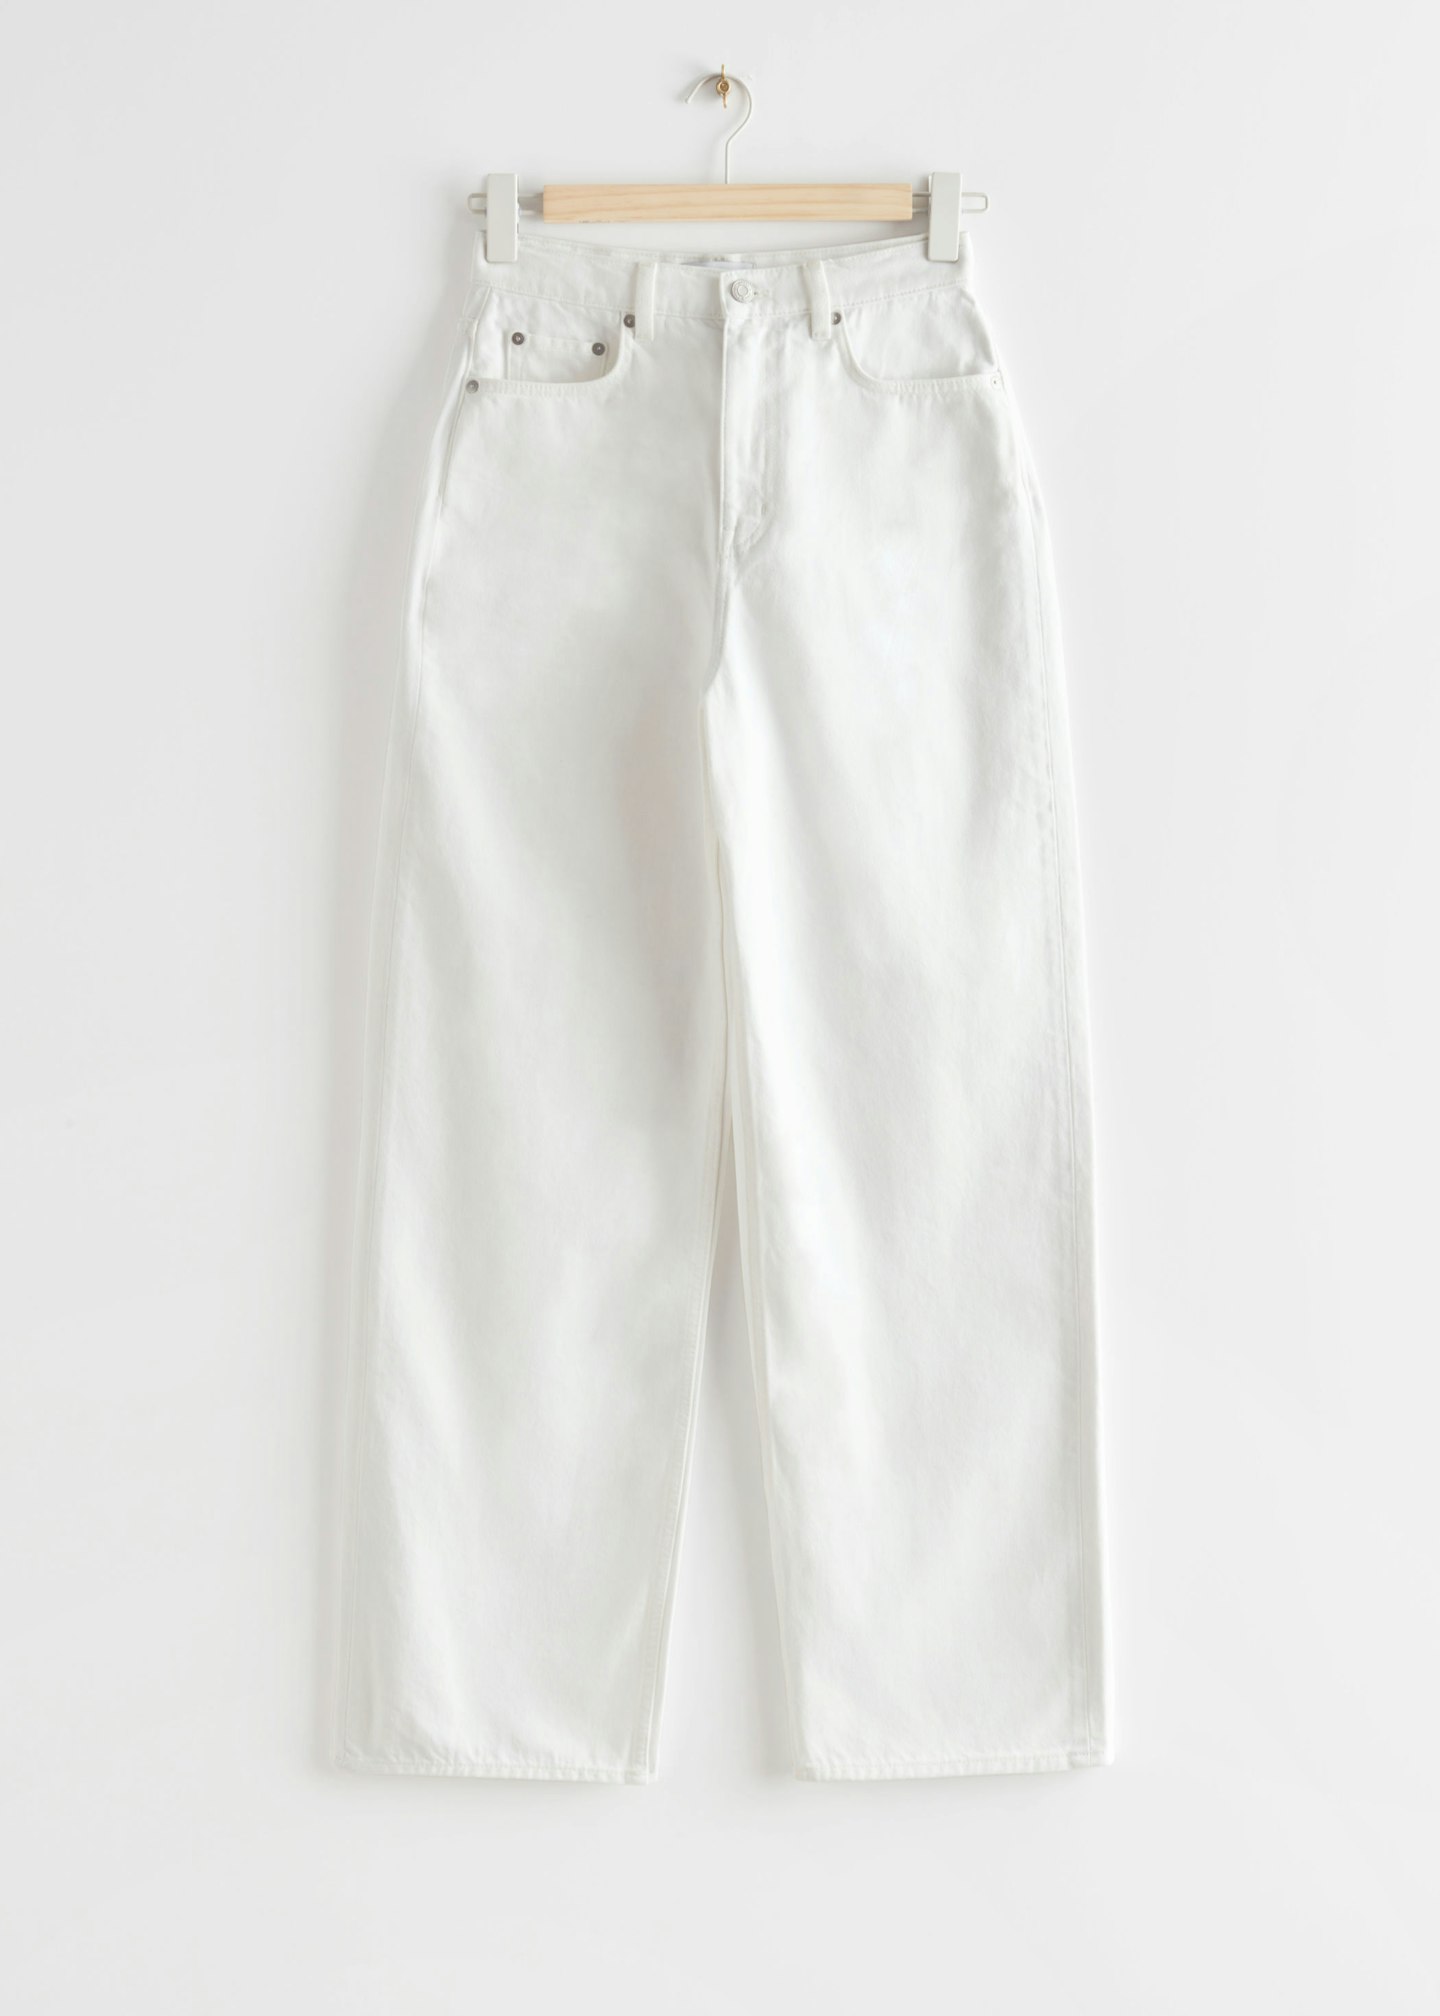 & Other Stories, Dear Cut Jeans, WAS £75 NOW £39